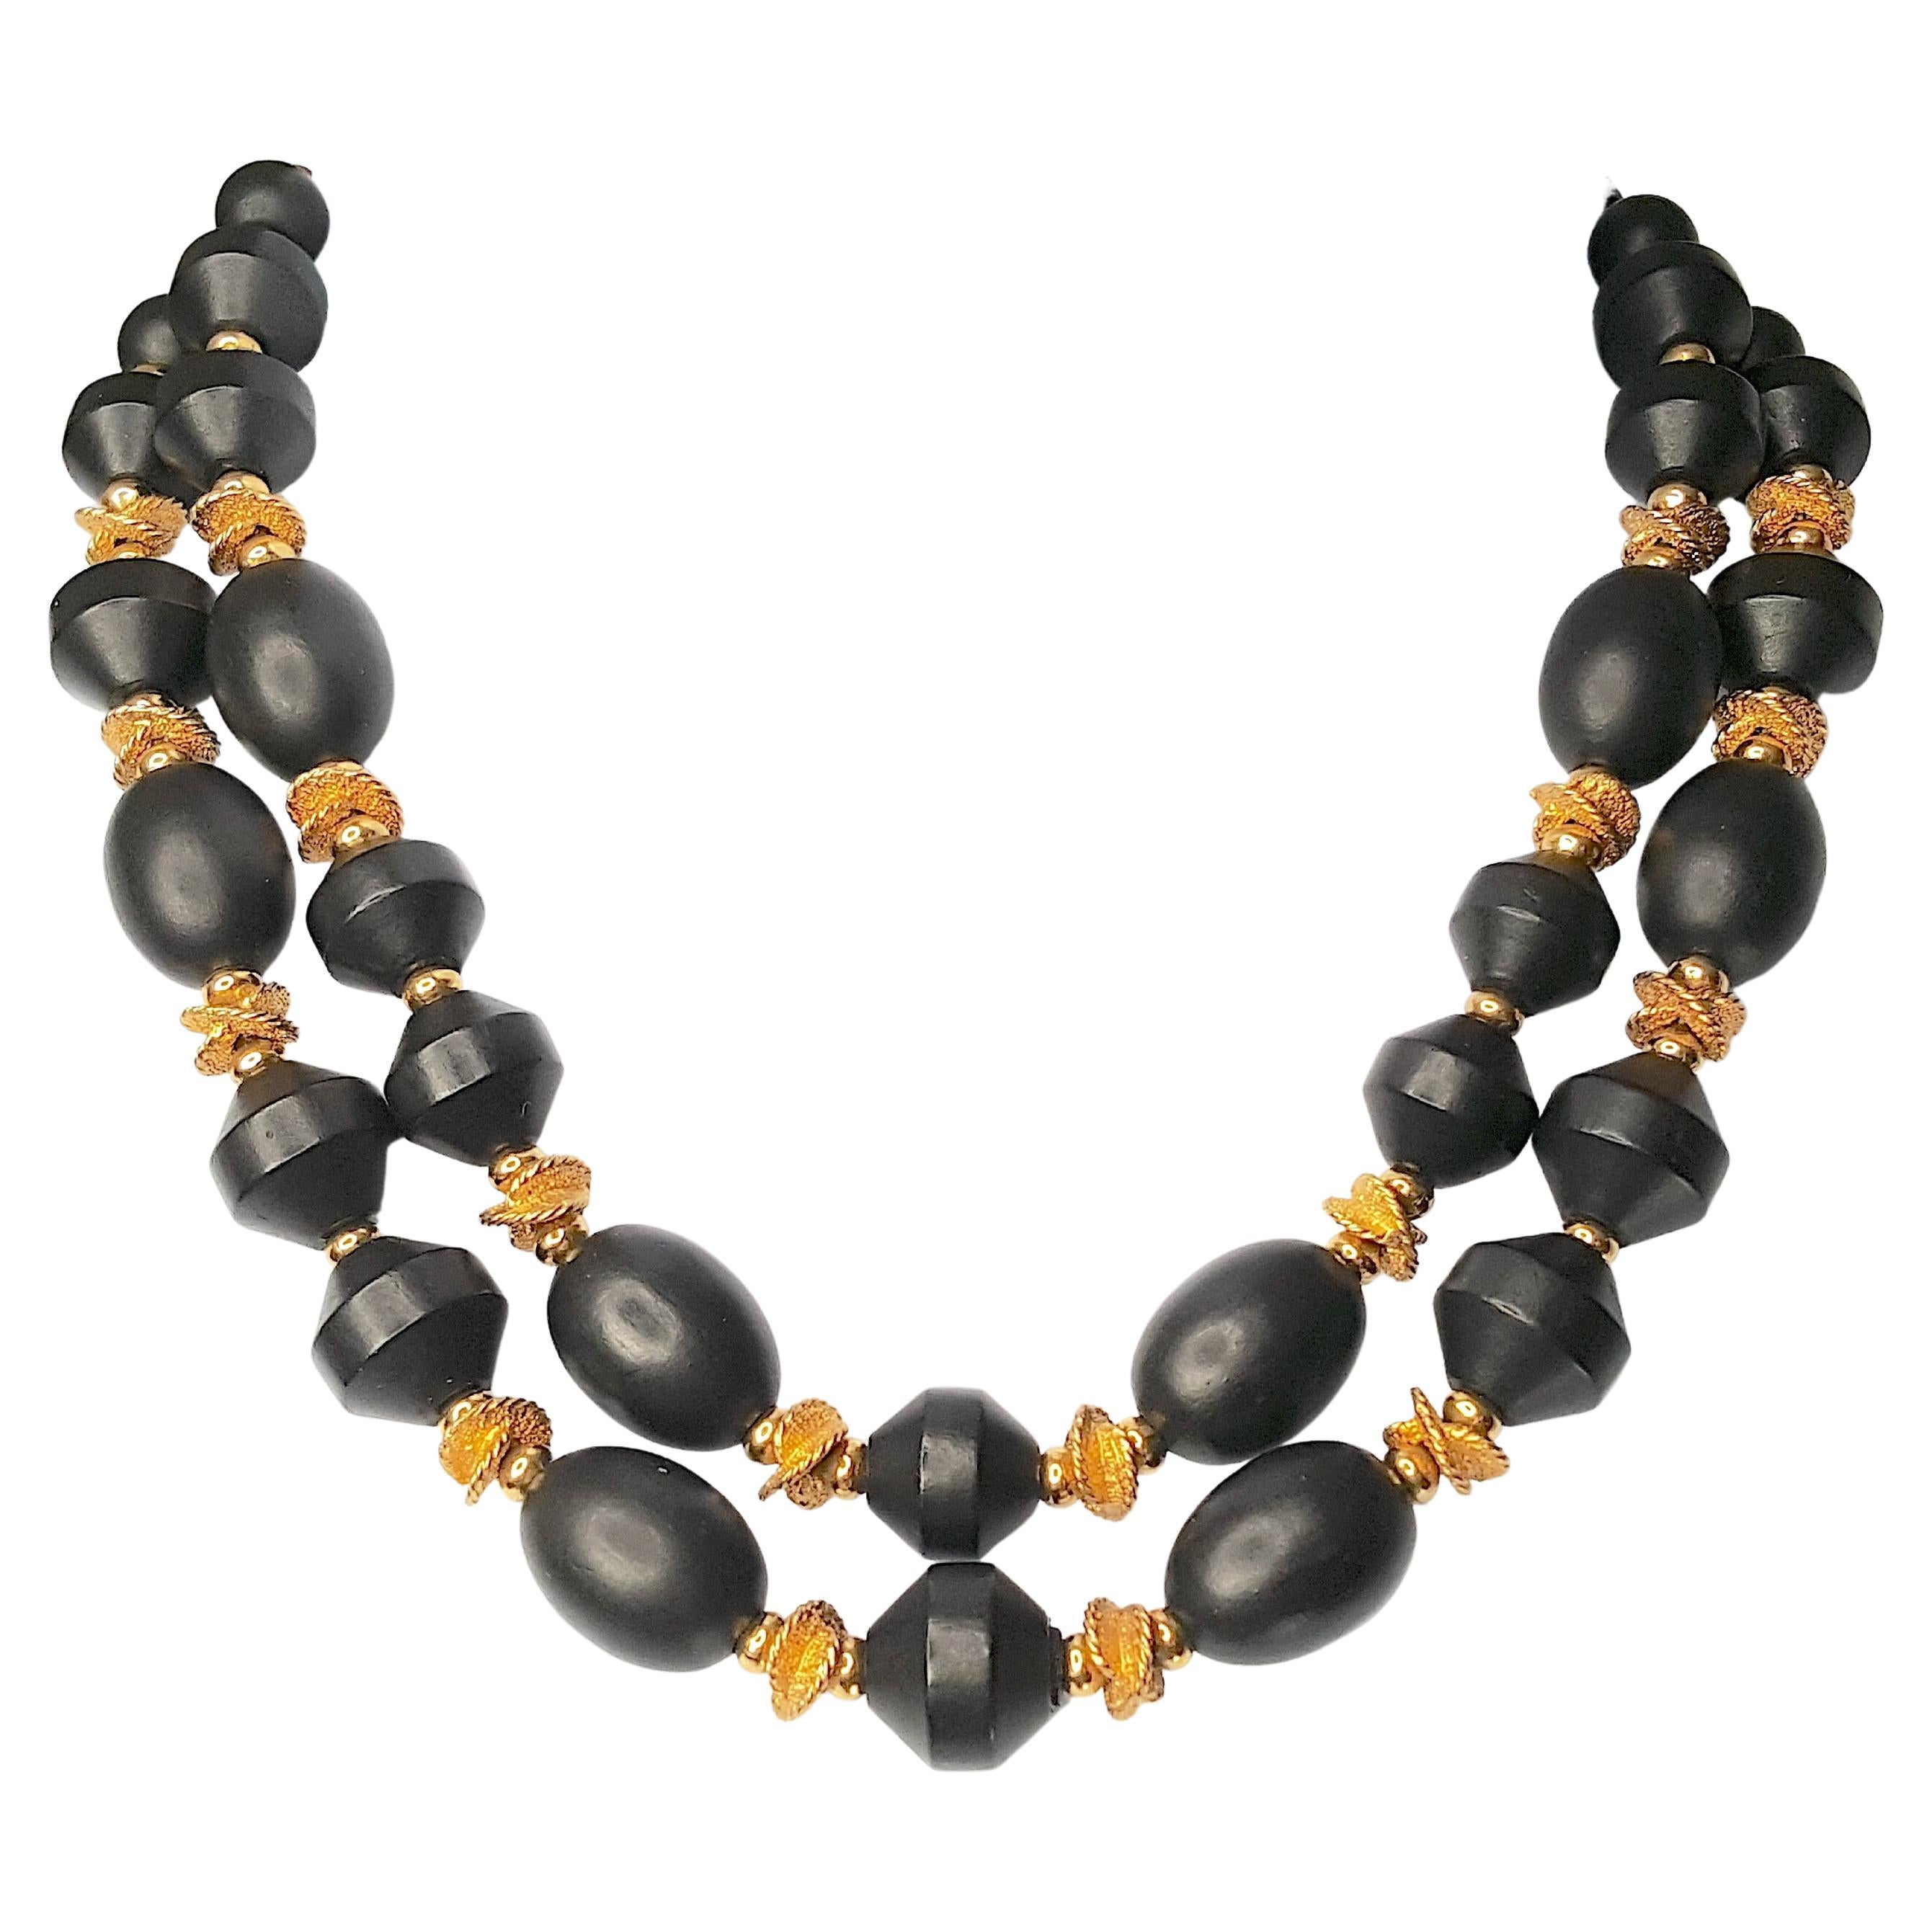 This Bakelite beaded double-strand black-and-gold necklace still sports the CoroCraft pegasus 1940s retail foil-tag. As an elegant take on 